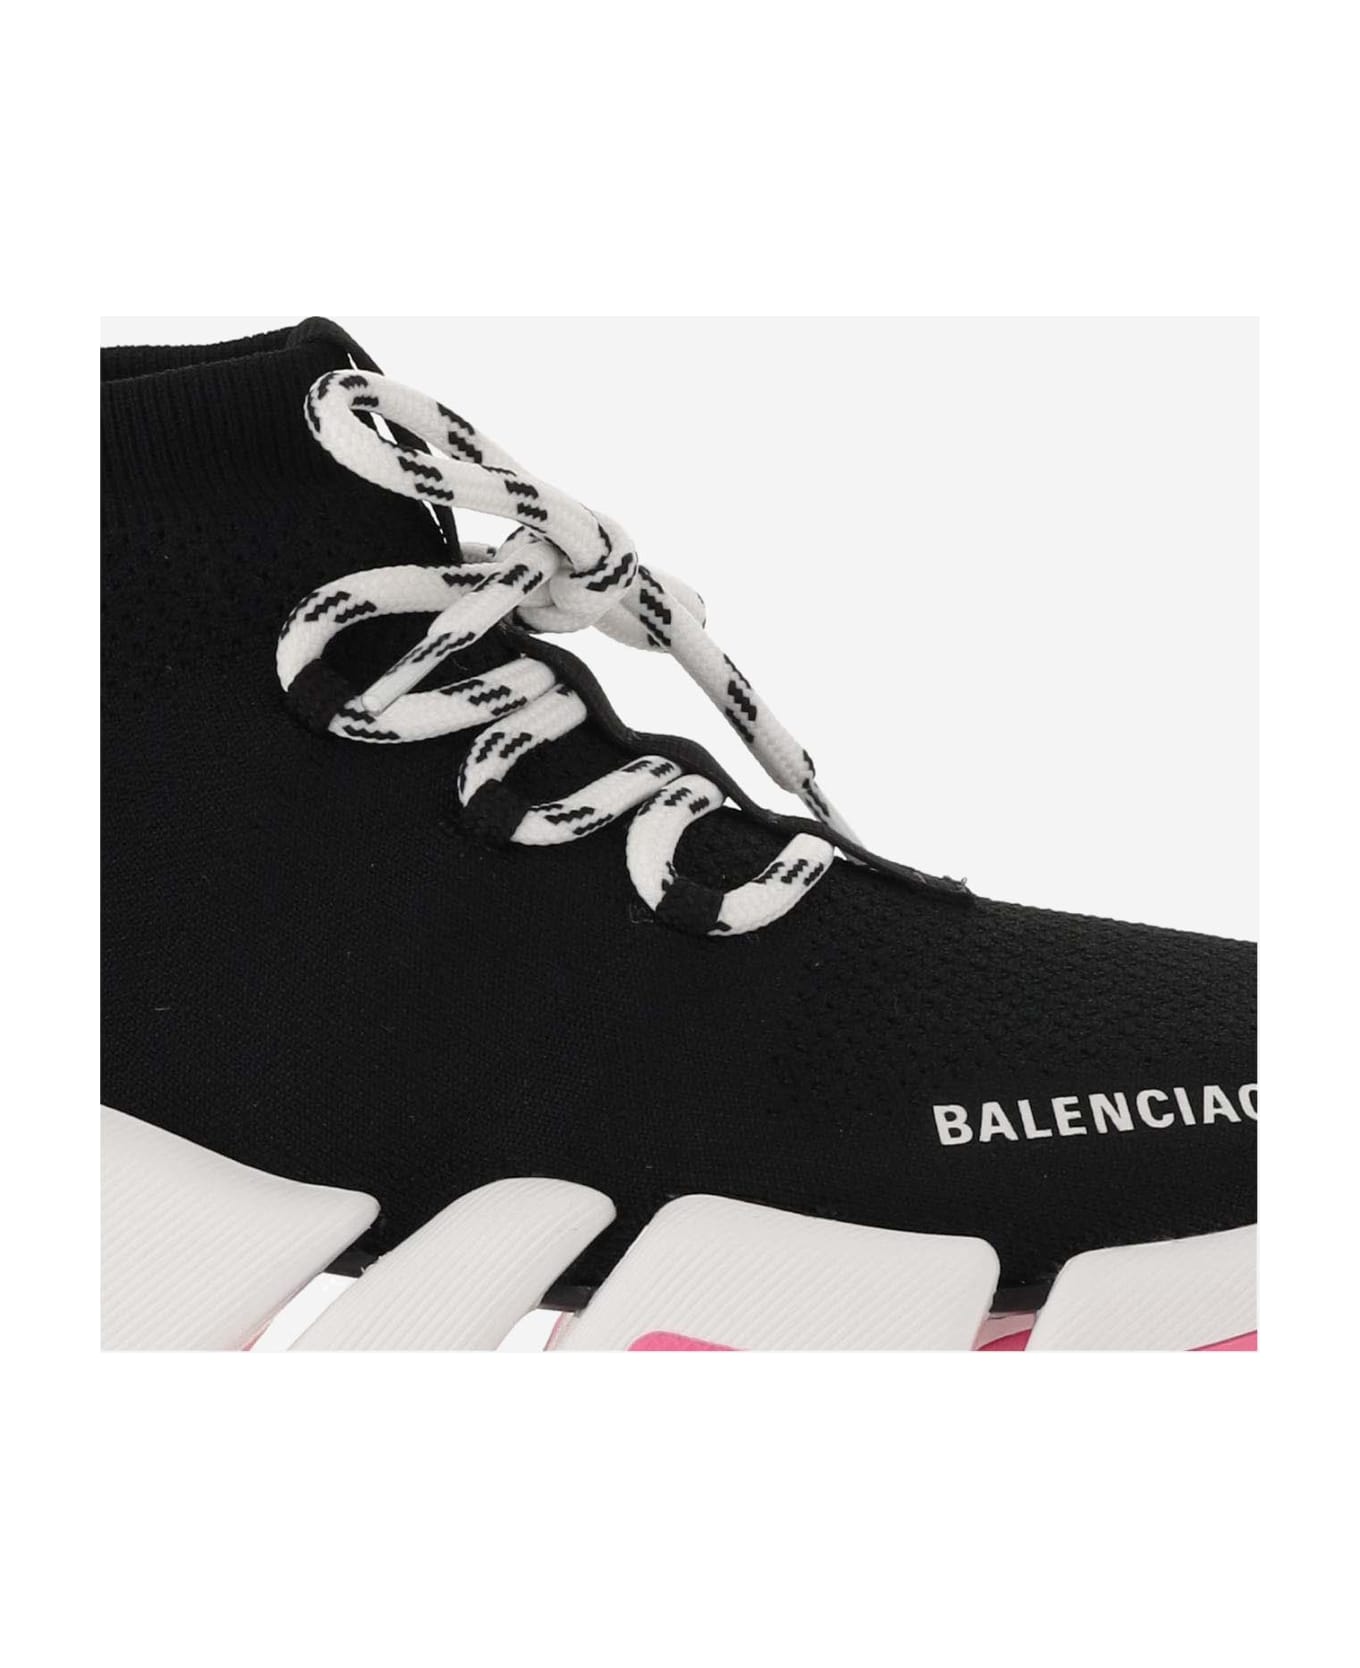 Balenciaga Recycled Mesh Speed 2.0 Lace-up Sneaker - Red